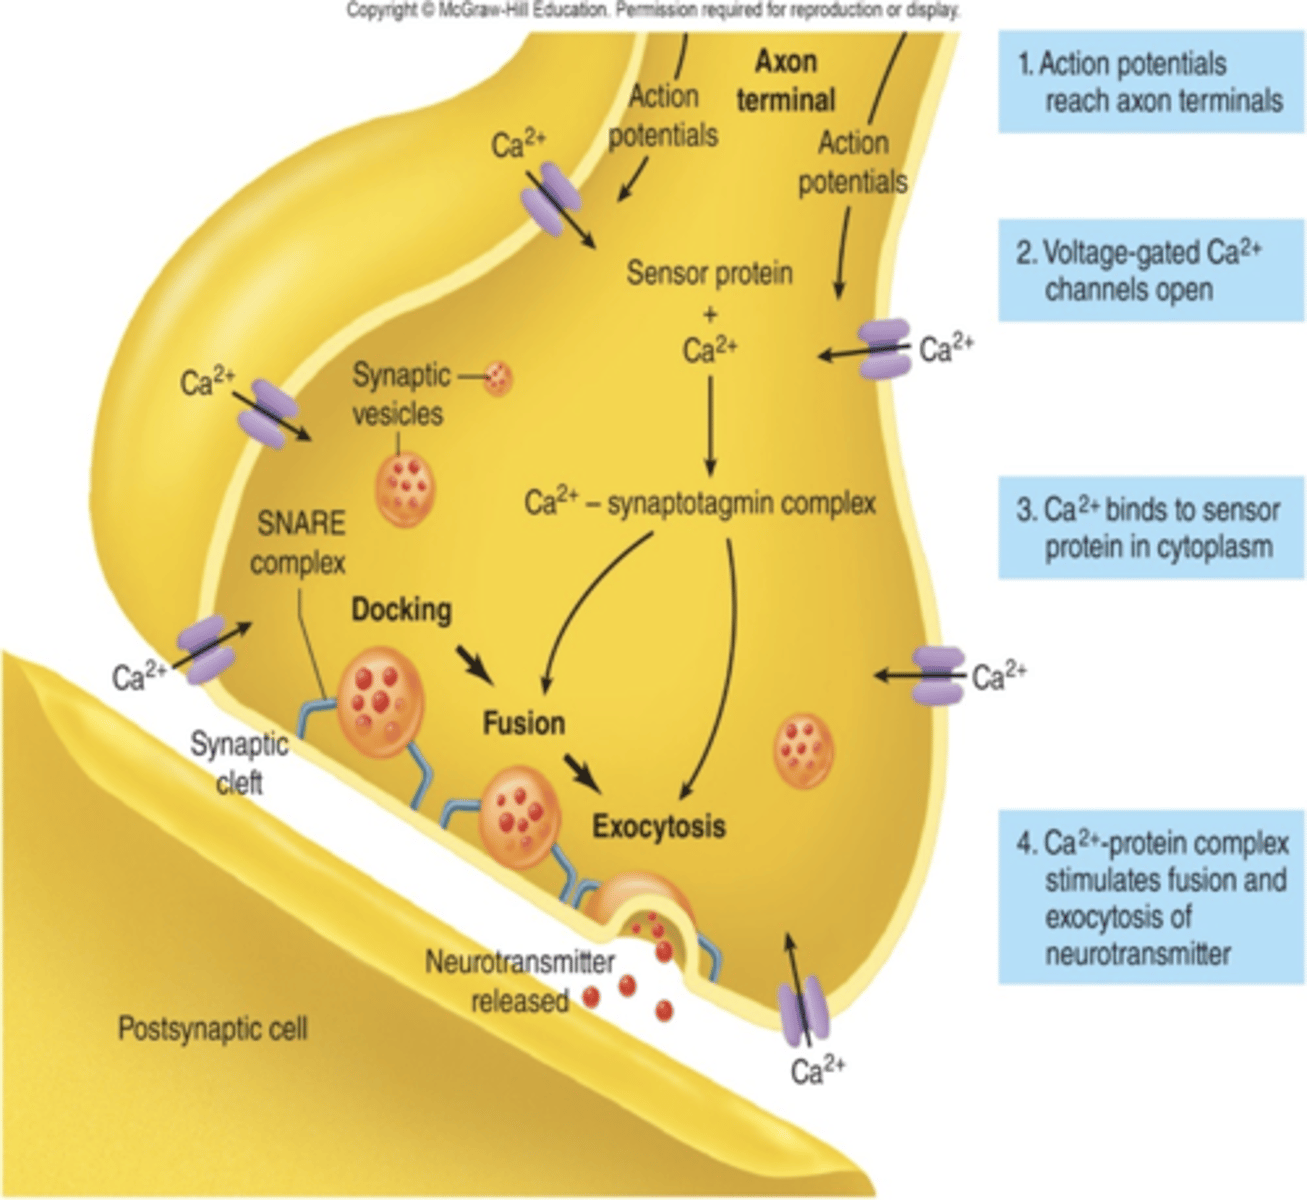 <p>1. Action potential, moving along axon's voltage-gated Na+ and K + channels, arrives at terminal.</p><p>2. Action potential opens voltage-gated Ca2+ channels (through depolarization).</p><p>3. Ca2+ influx triggers neurotransmitter release into the synaptic cleft (from the active zones) when AP reaches nerve terminal (bouton) via exocytosis mediated by SNARE pin.</p><p>4. The binding of neurotransmitters to receptor proteins in the postsynaptic membrane is linked to an alteration in its ion permeability. Example:</p><p>- Ionotropic receptors: ligand-gated ion channels</p><p>- Metabotropic receptors: mediate slower actions through G-protein second messengers.</p>